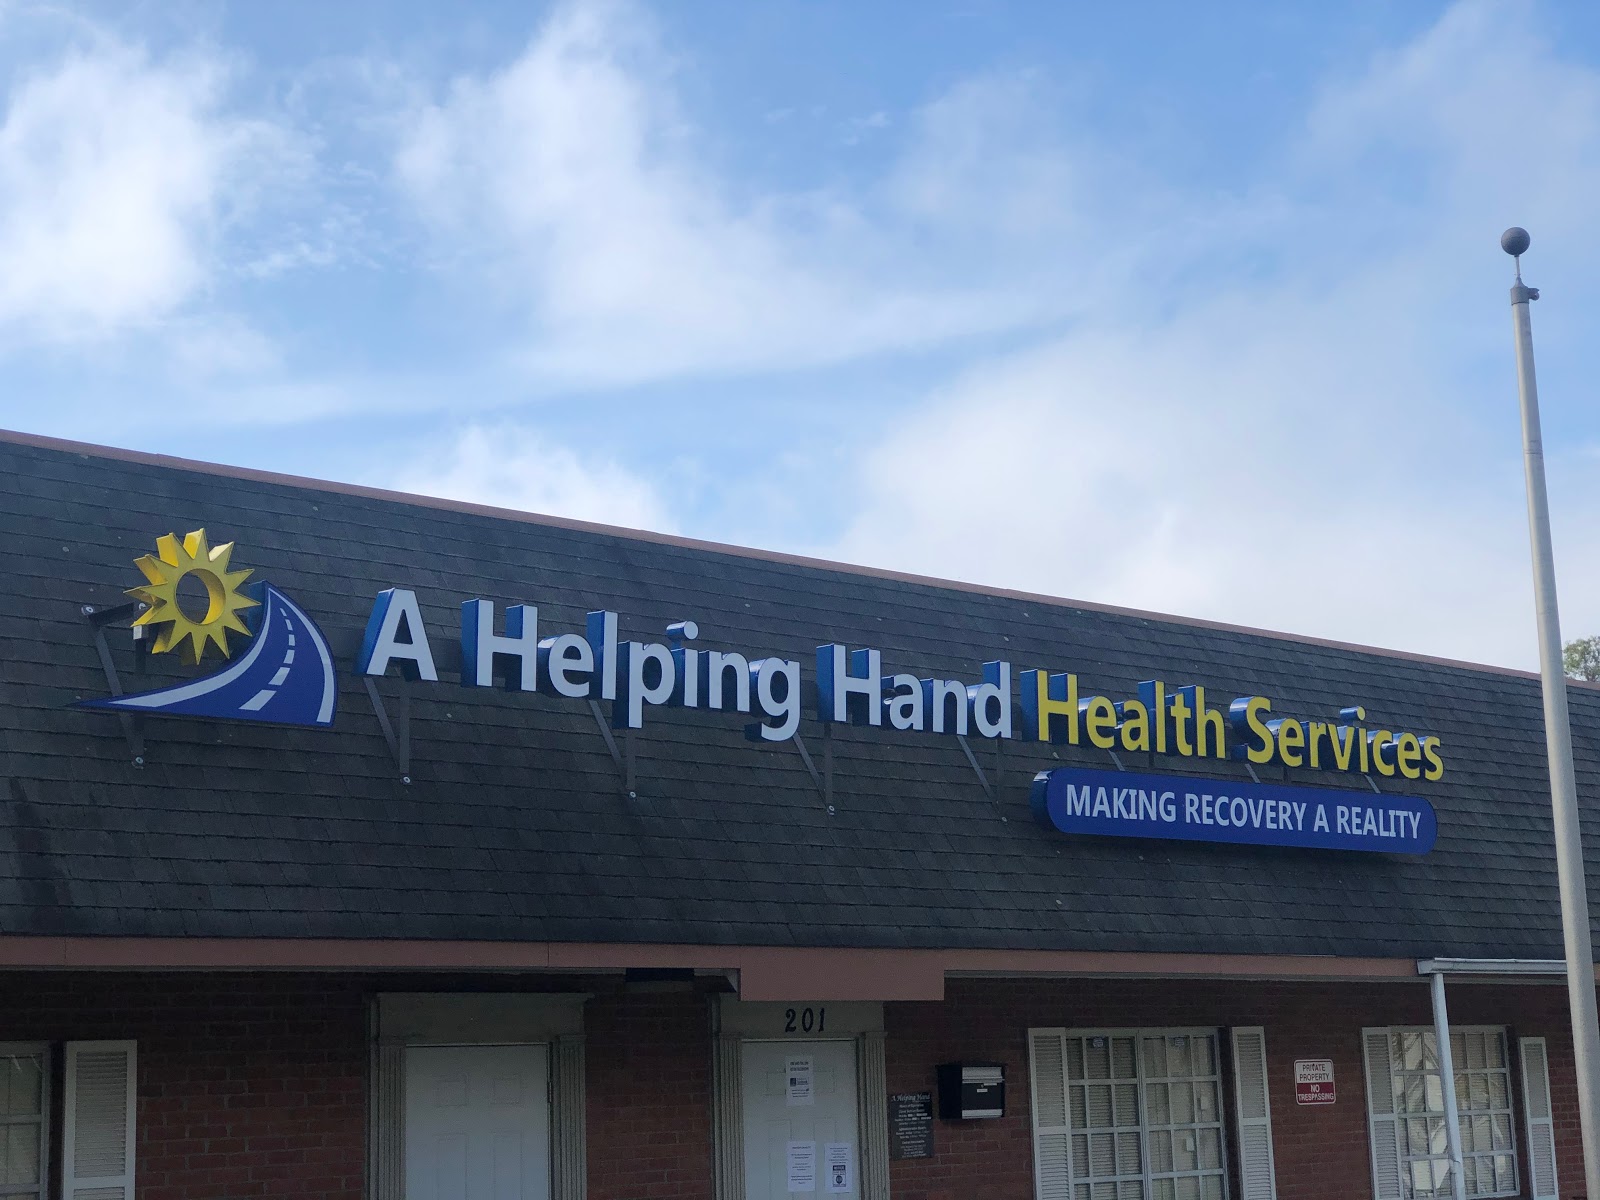 A Helping Hand Health Services